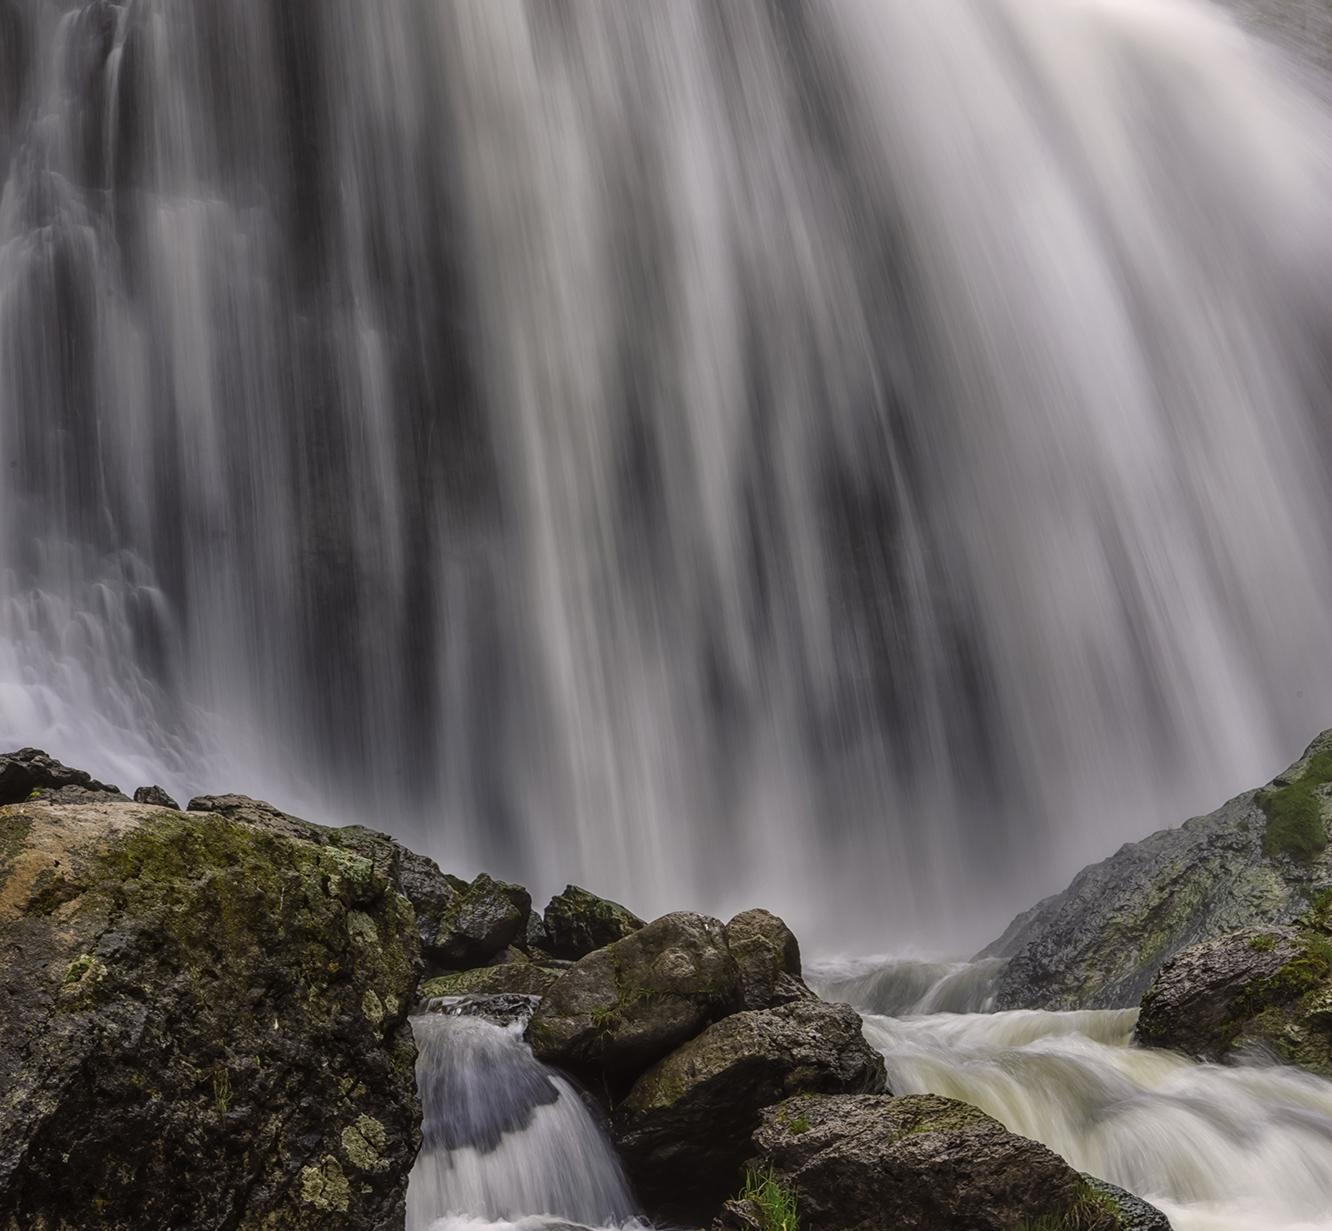 The Sound of The Falls. - Contemporary Photograph by Vahé Peroomian